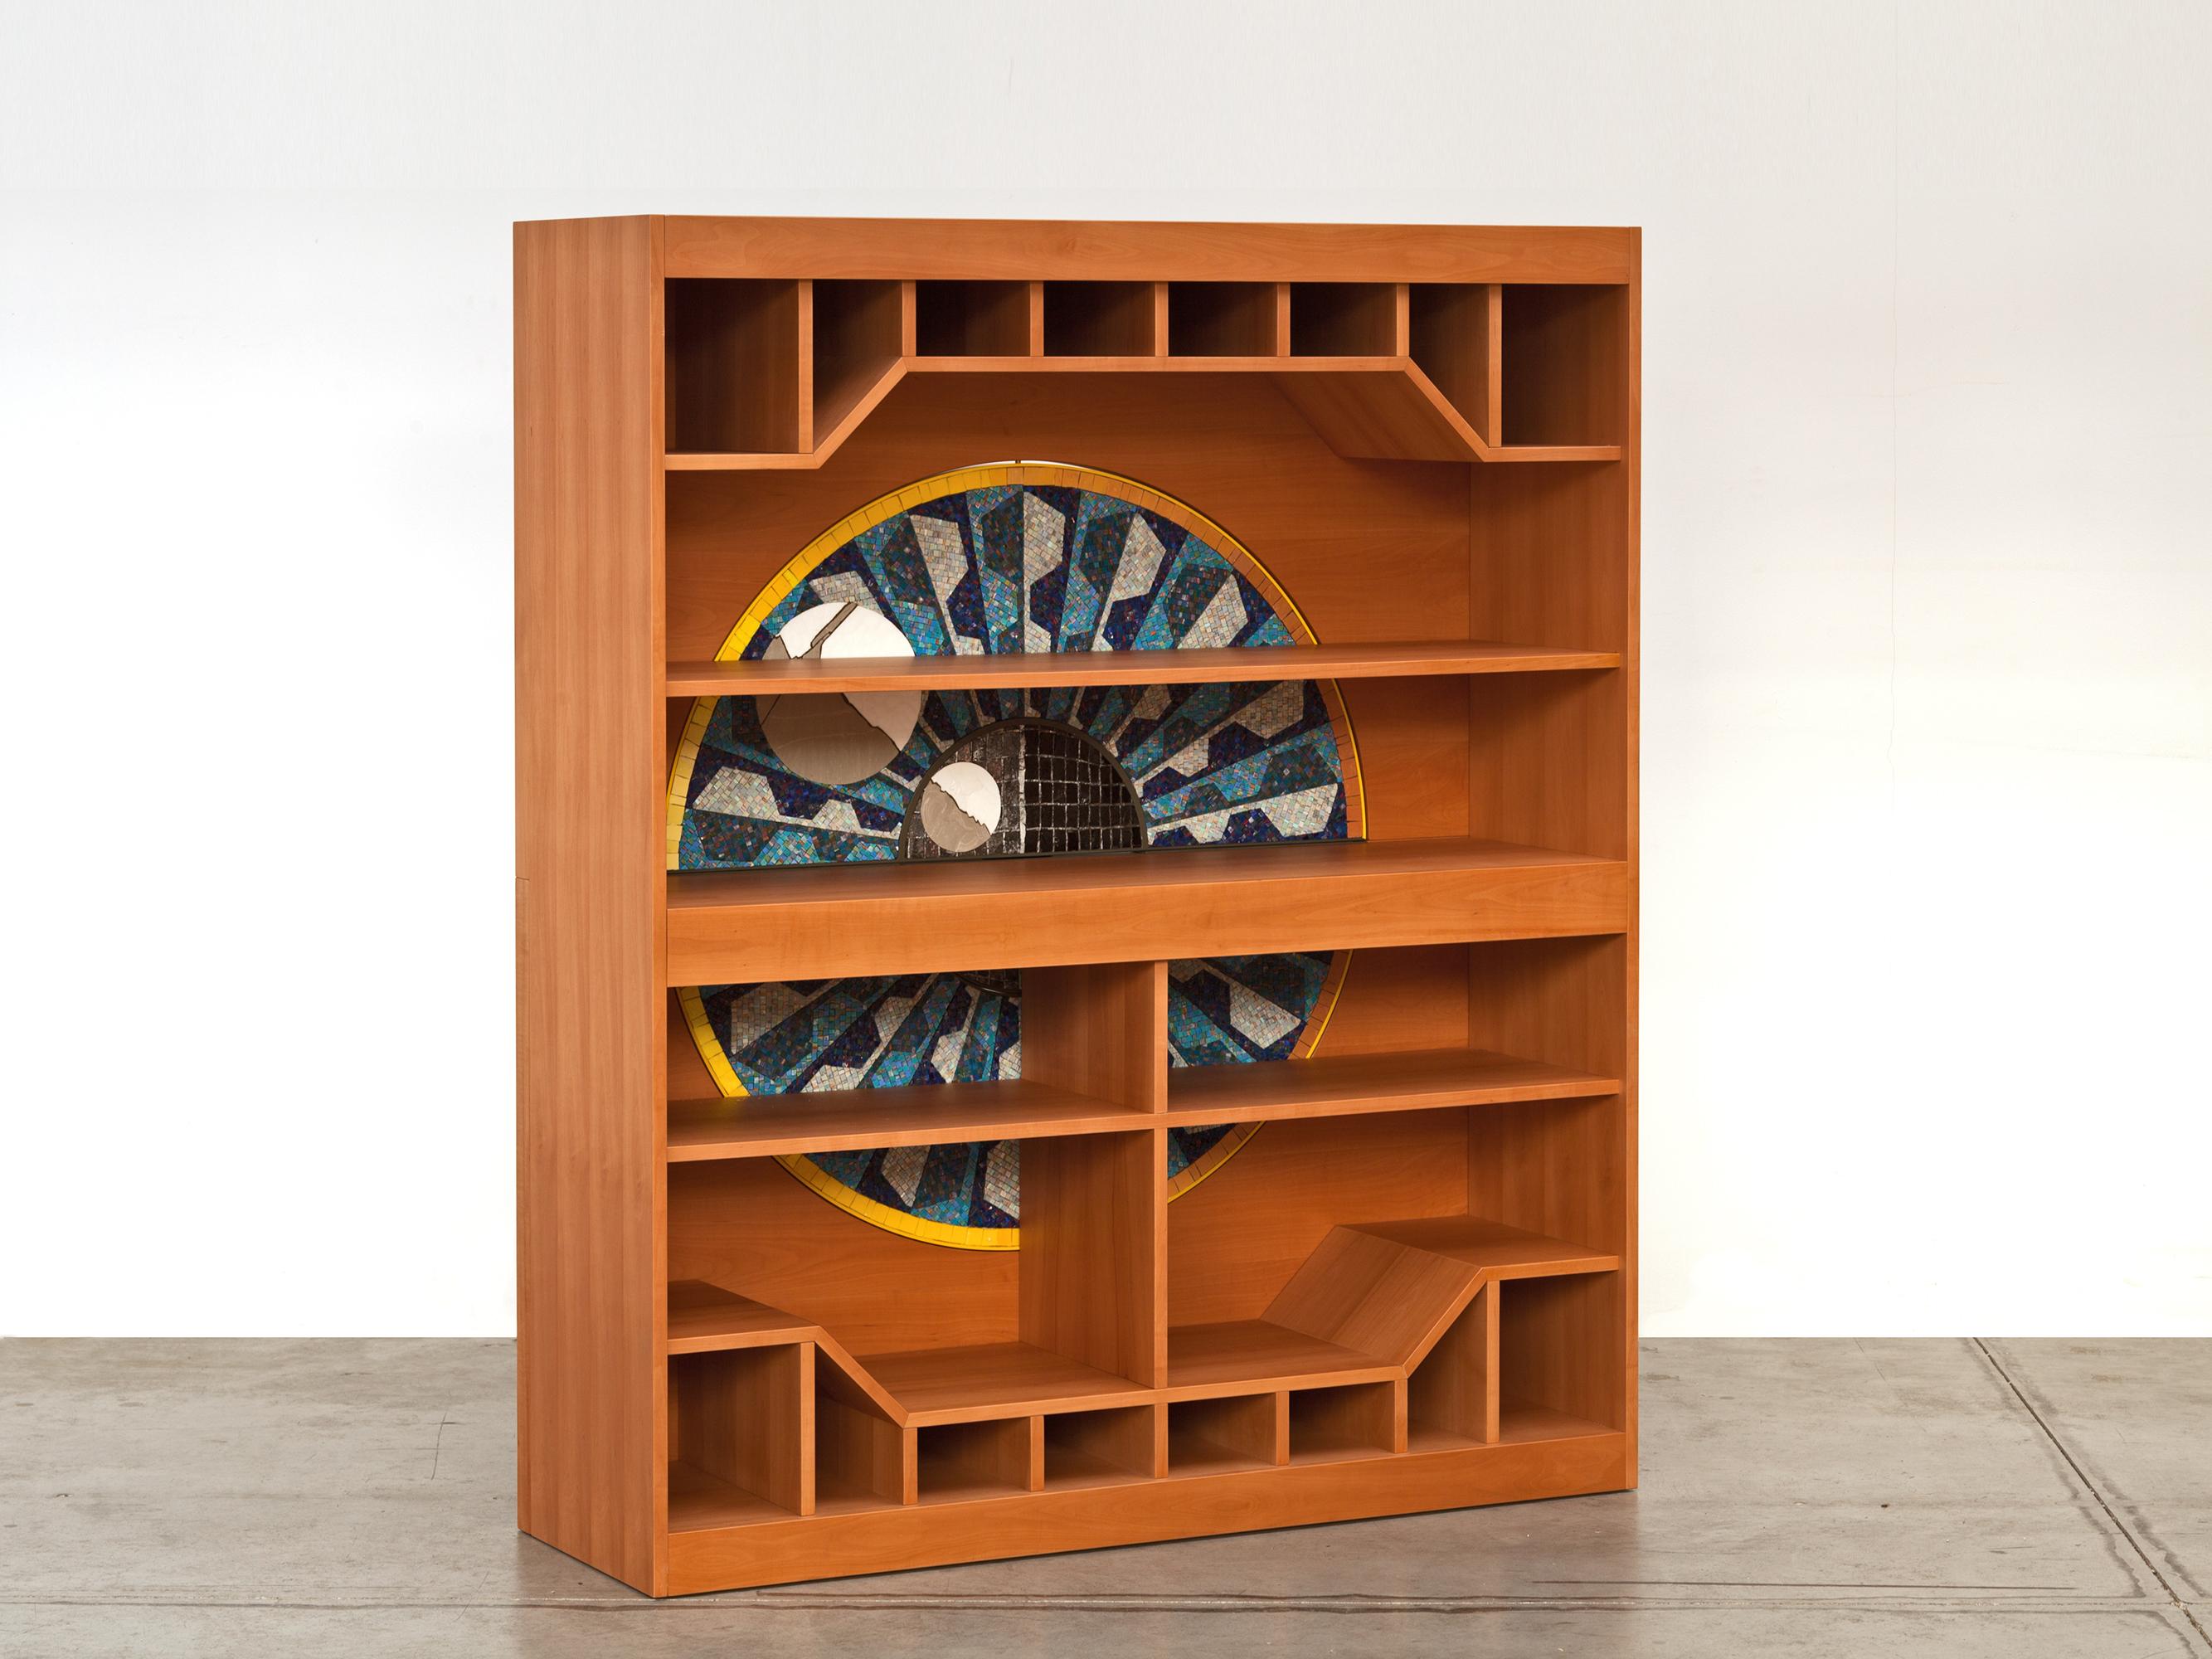 Italian Double-sided cabinet Collector from the Alexandre Arrechea SoShiro collaboration For Sale